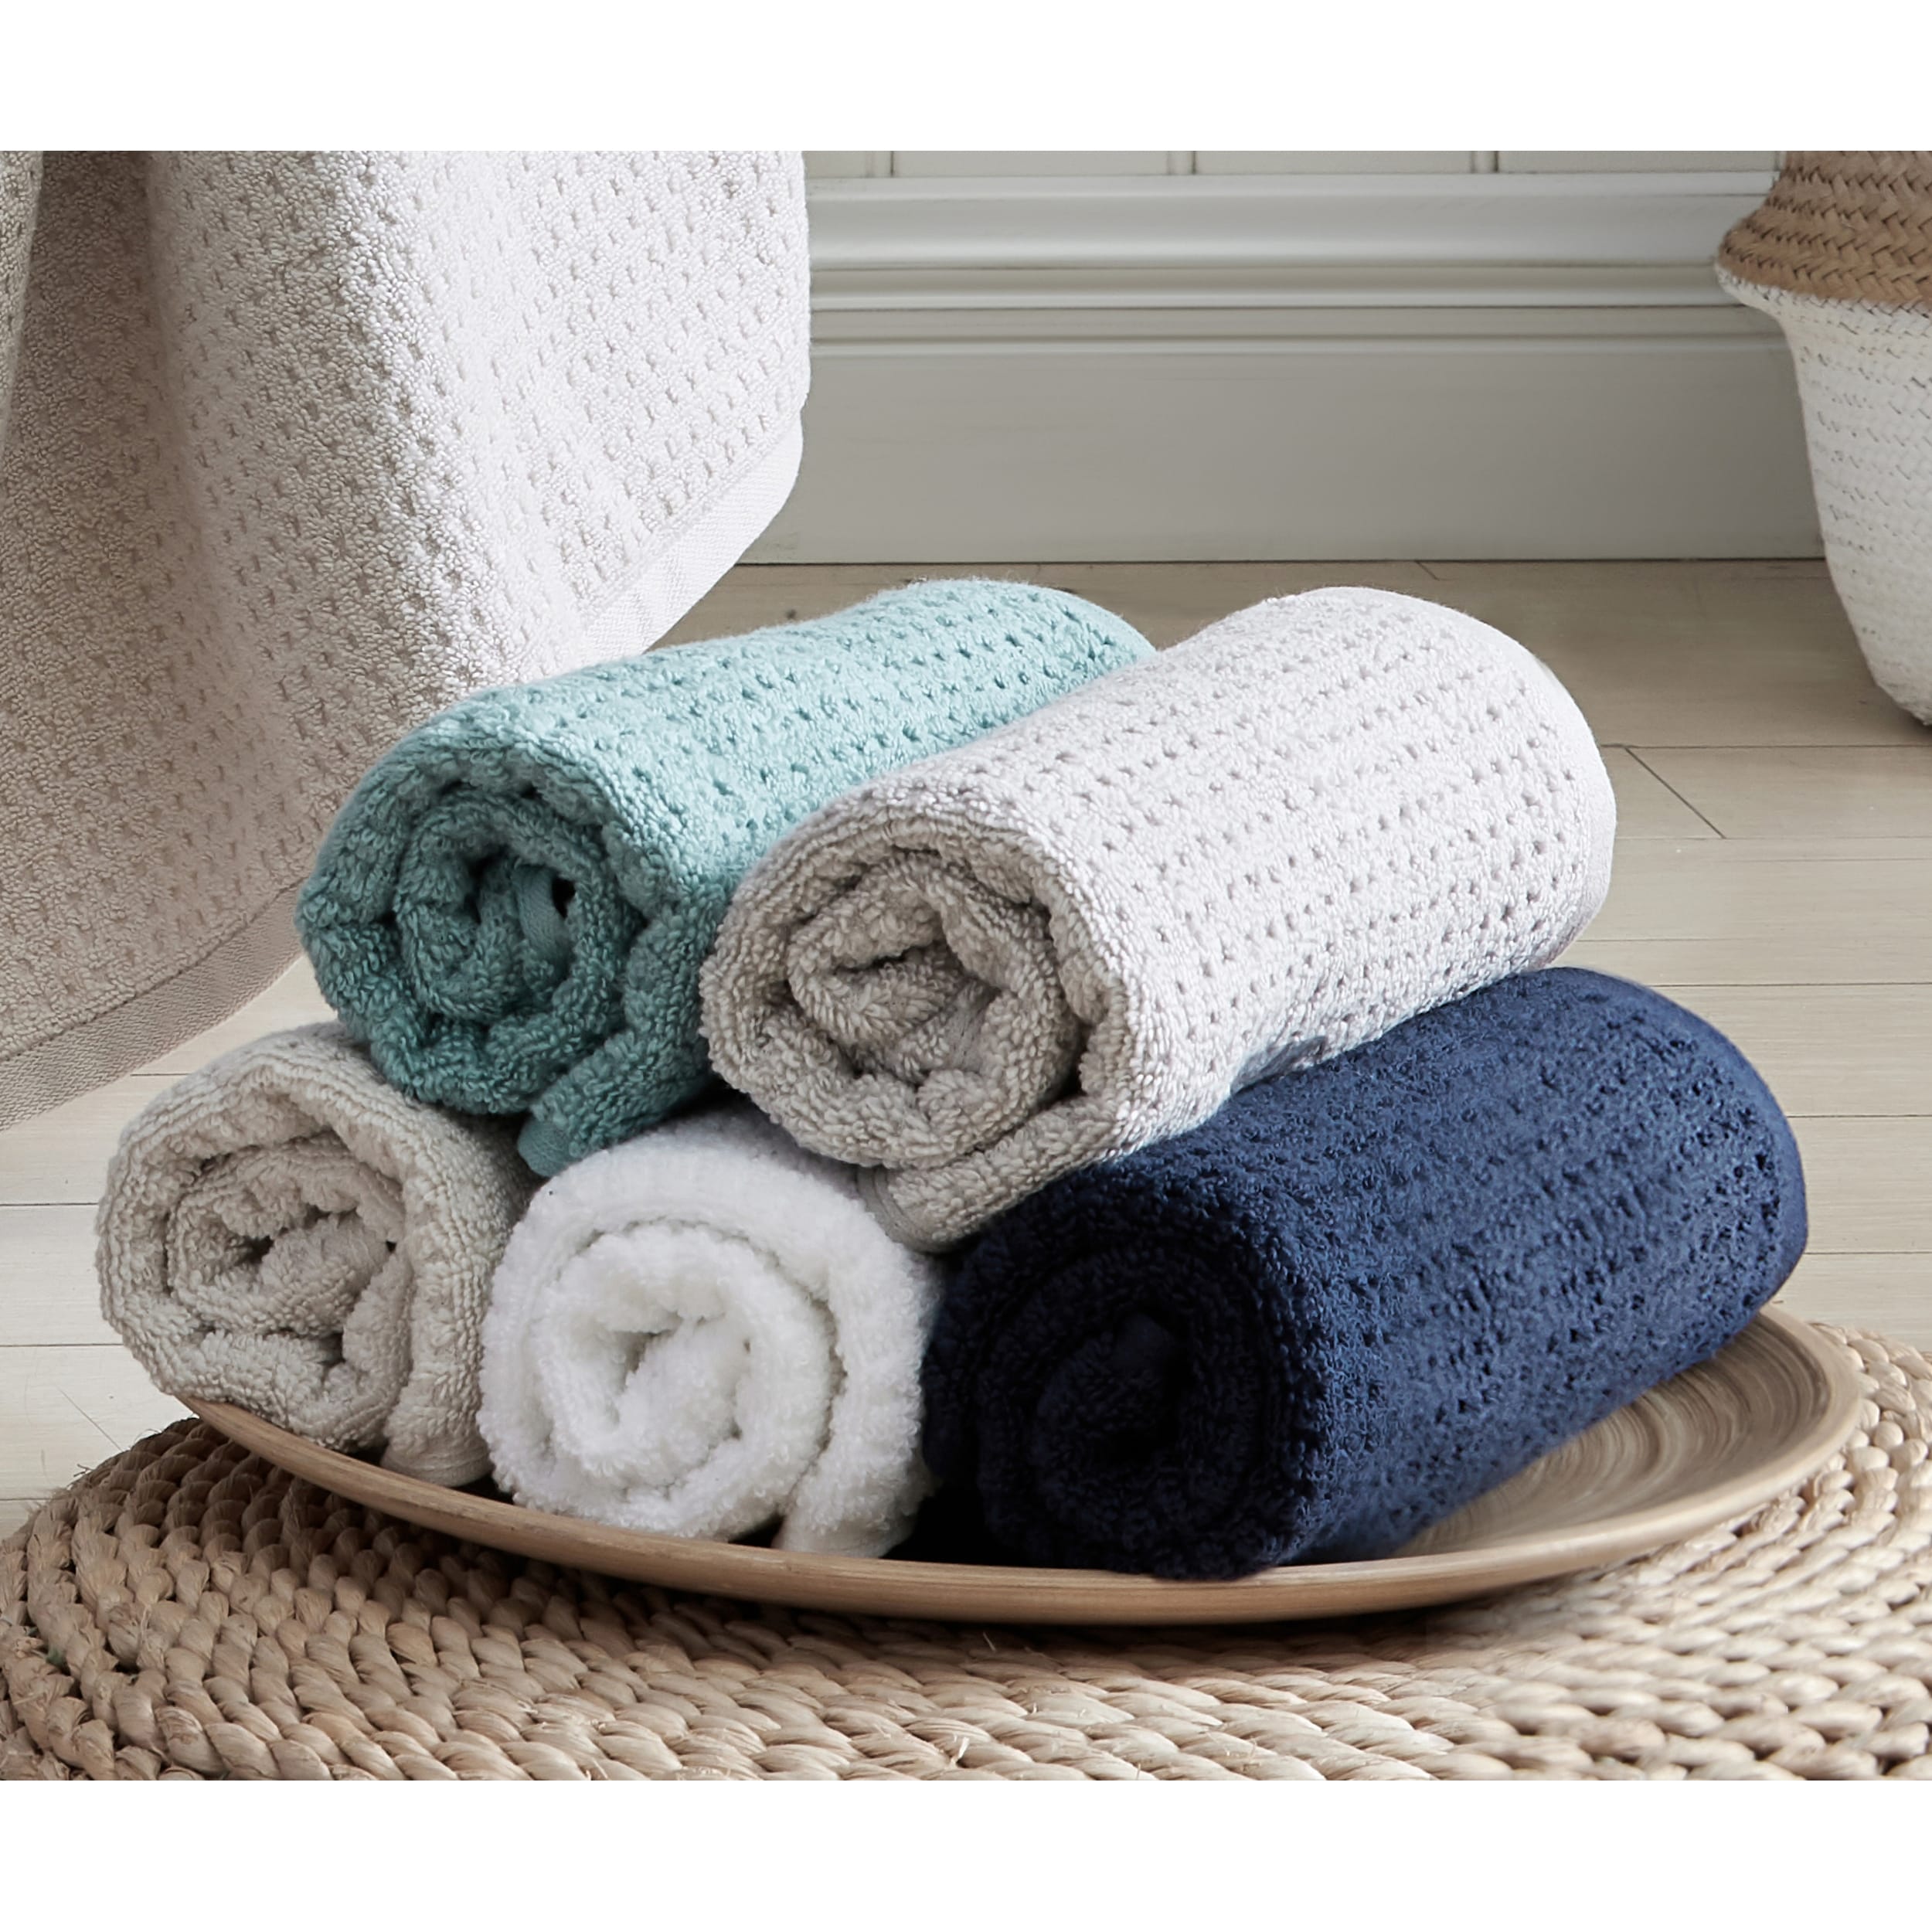 TOMMY BAHAMA NORTHERN PACIFIC ~ 8 PIECE BATH TOWEL SET IN CHARCOAL ~ NEW!